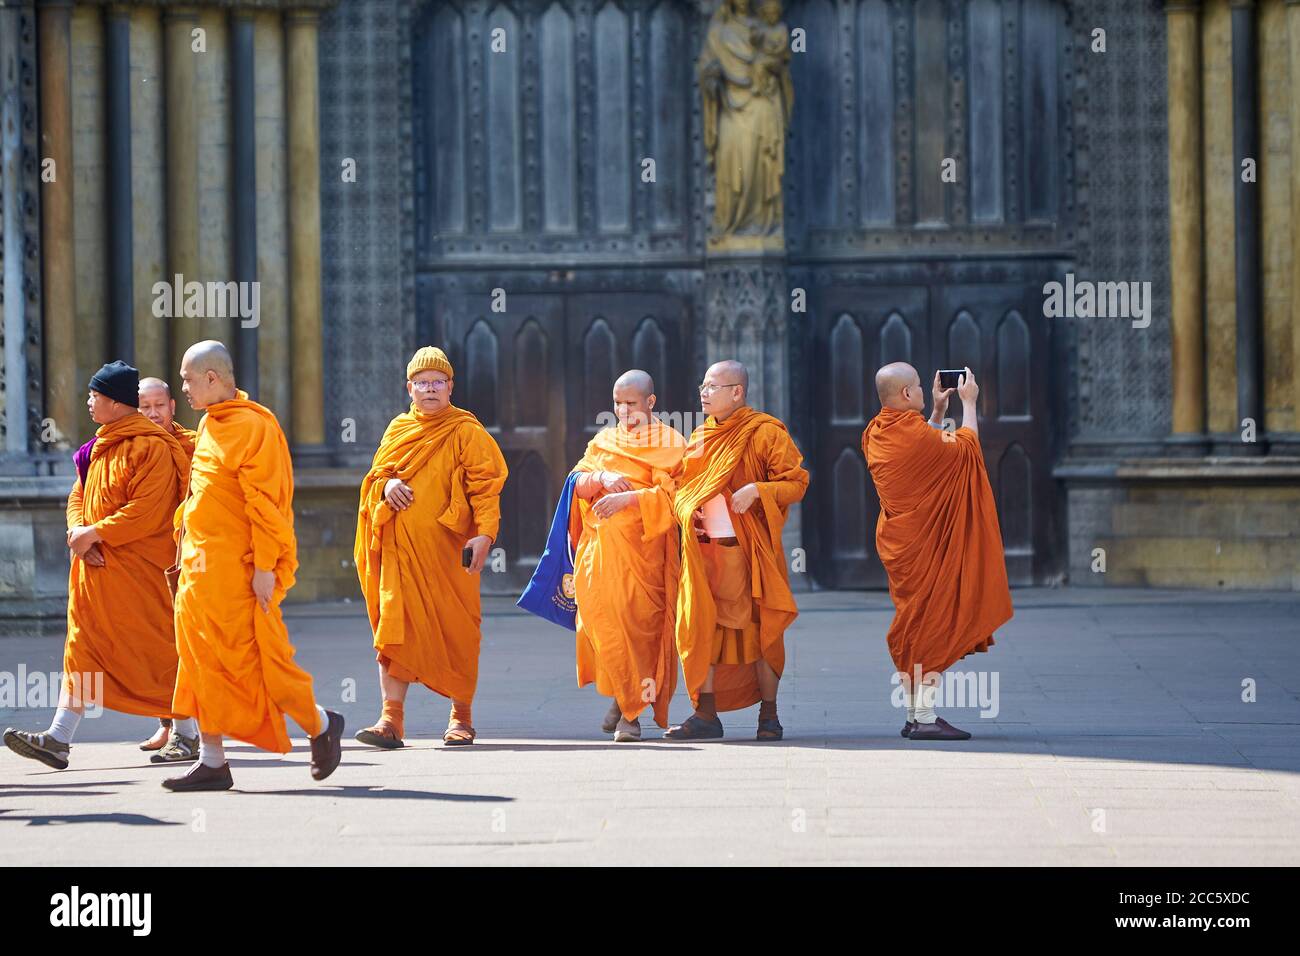 Buddhist monks visiting Westminster Abbey in London Stock Photo